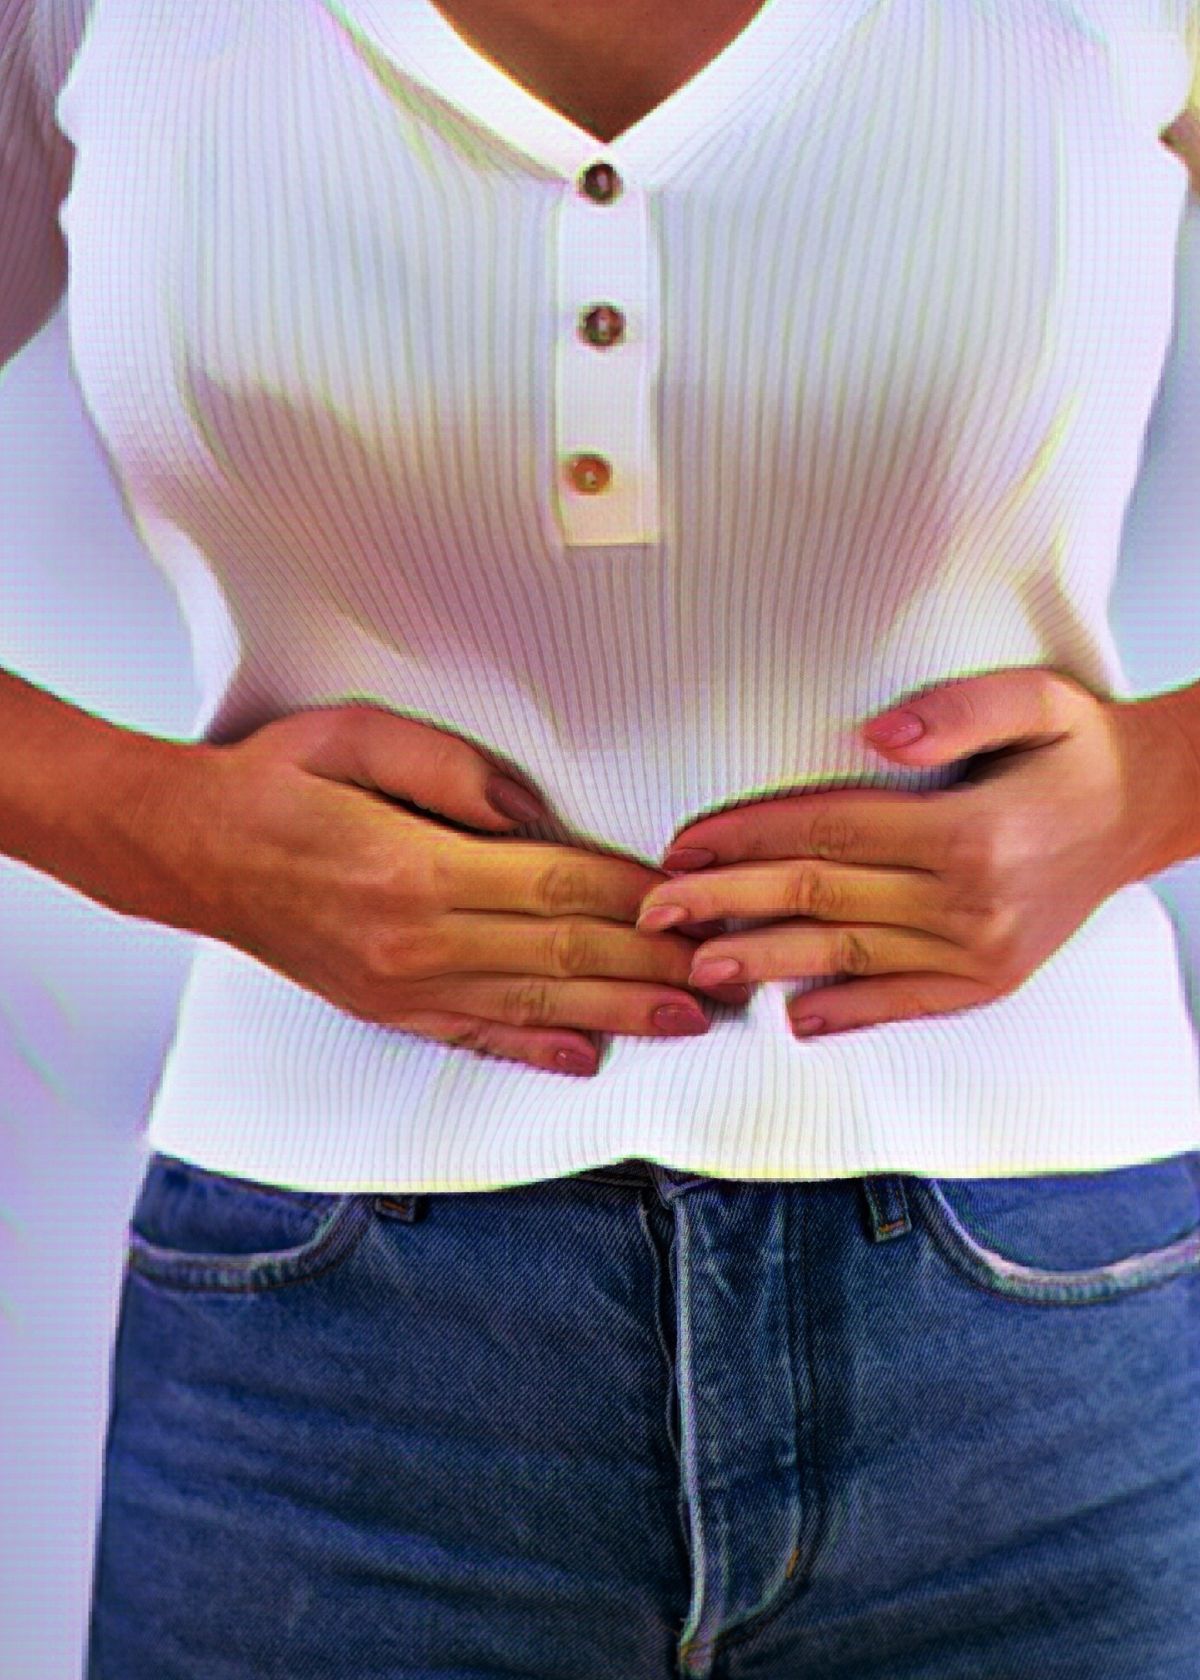 The Best Probiotic for Diverticulitis : How to Find Instant Relief!